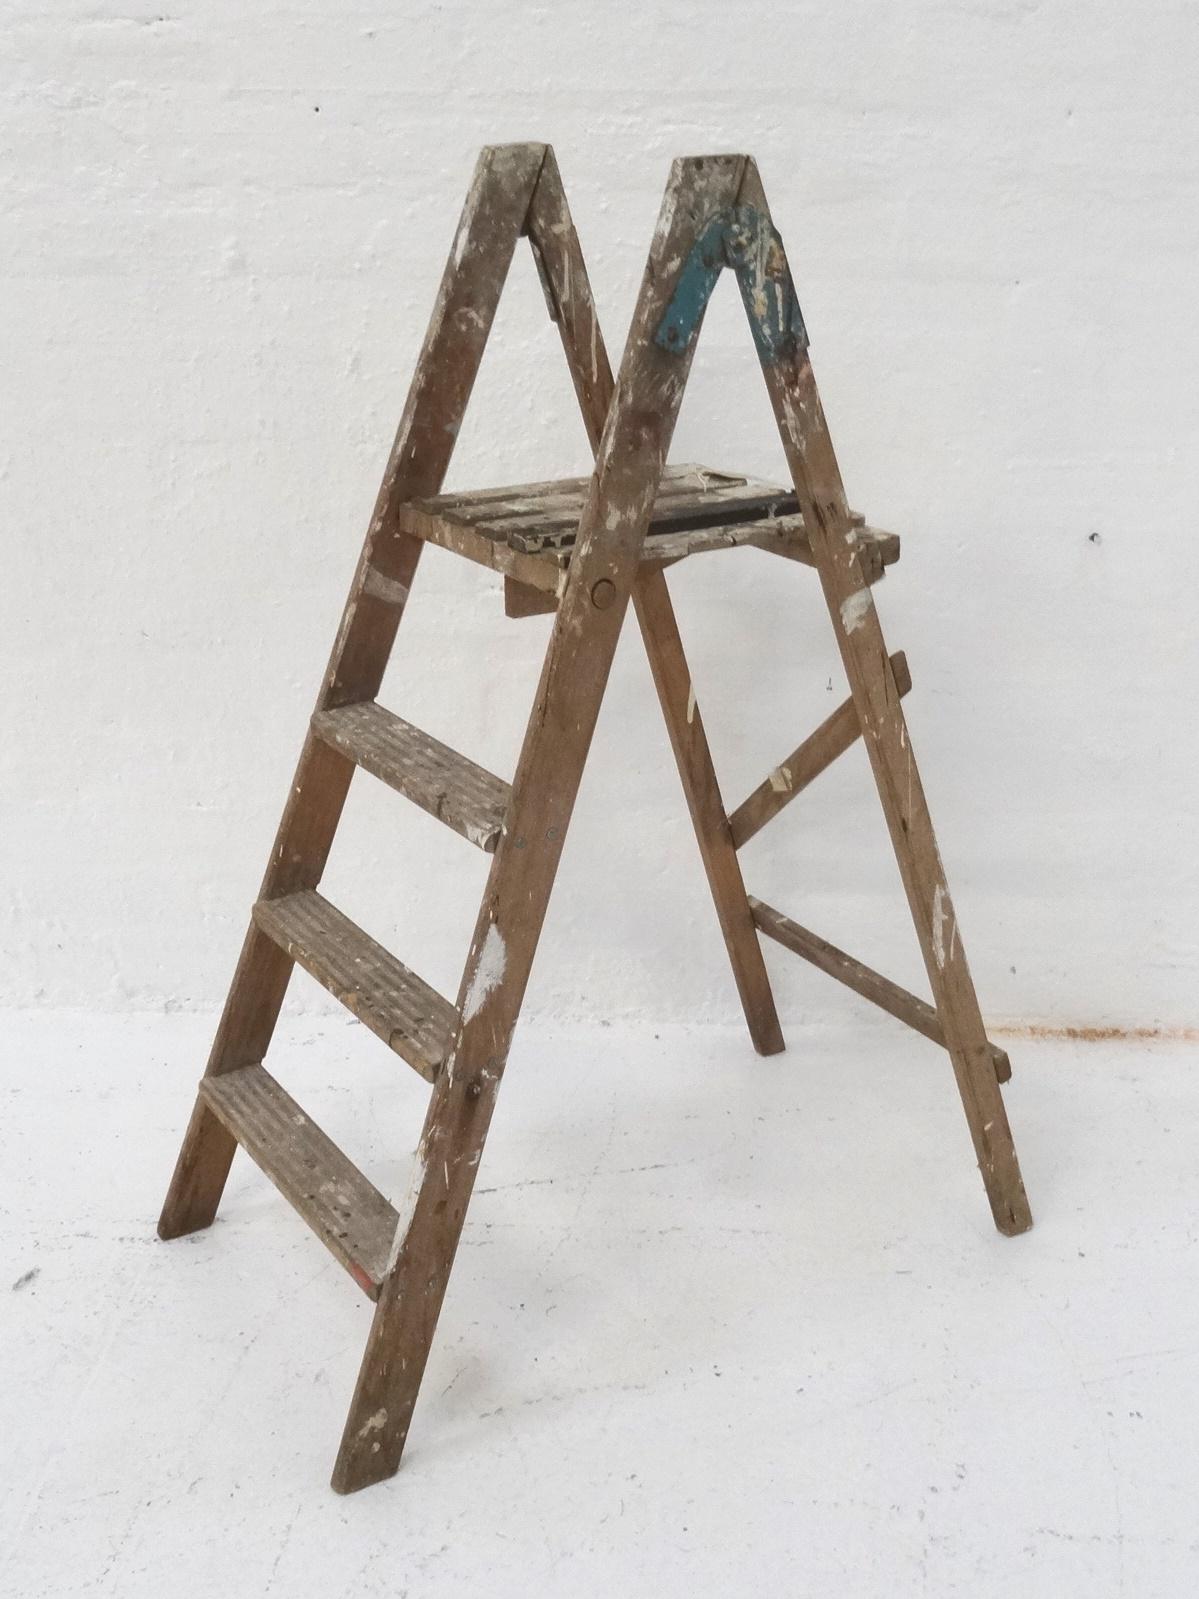 VINTAGE WOODEN FOLDING LADDER with a slatted top and three steps